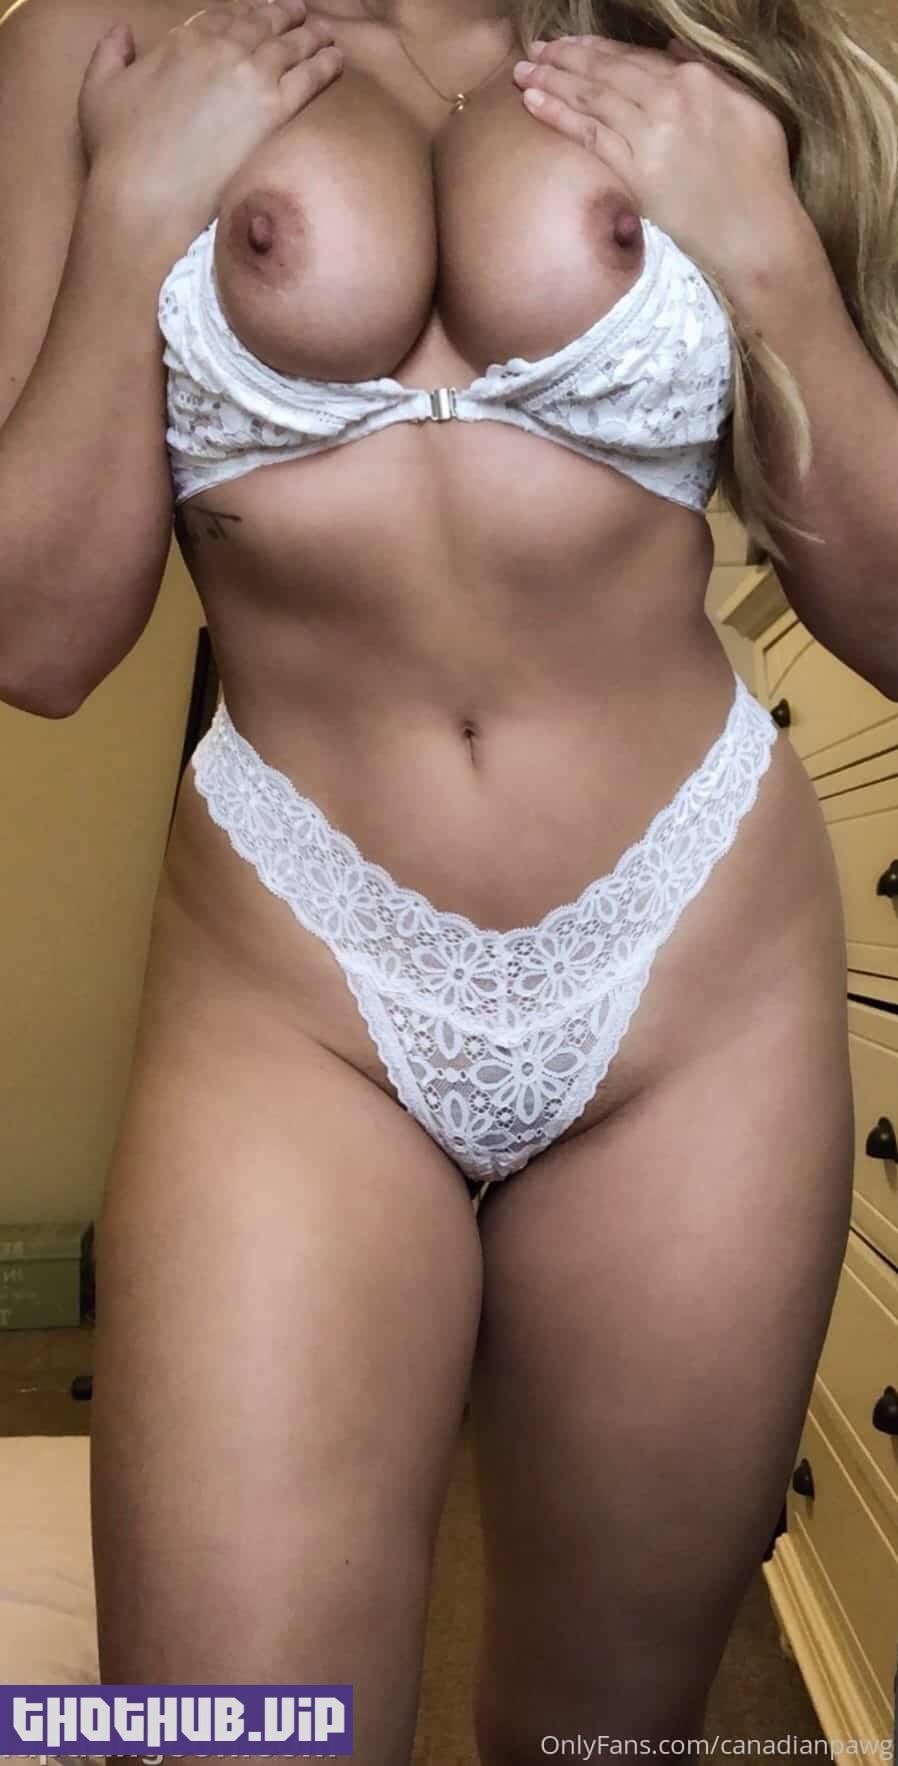 1661052752 483 Canadianpawg %E2%80%93 Big Booty Pawg Onlyfans Nudes